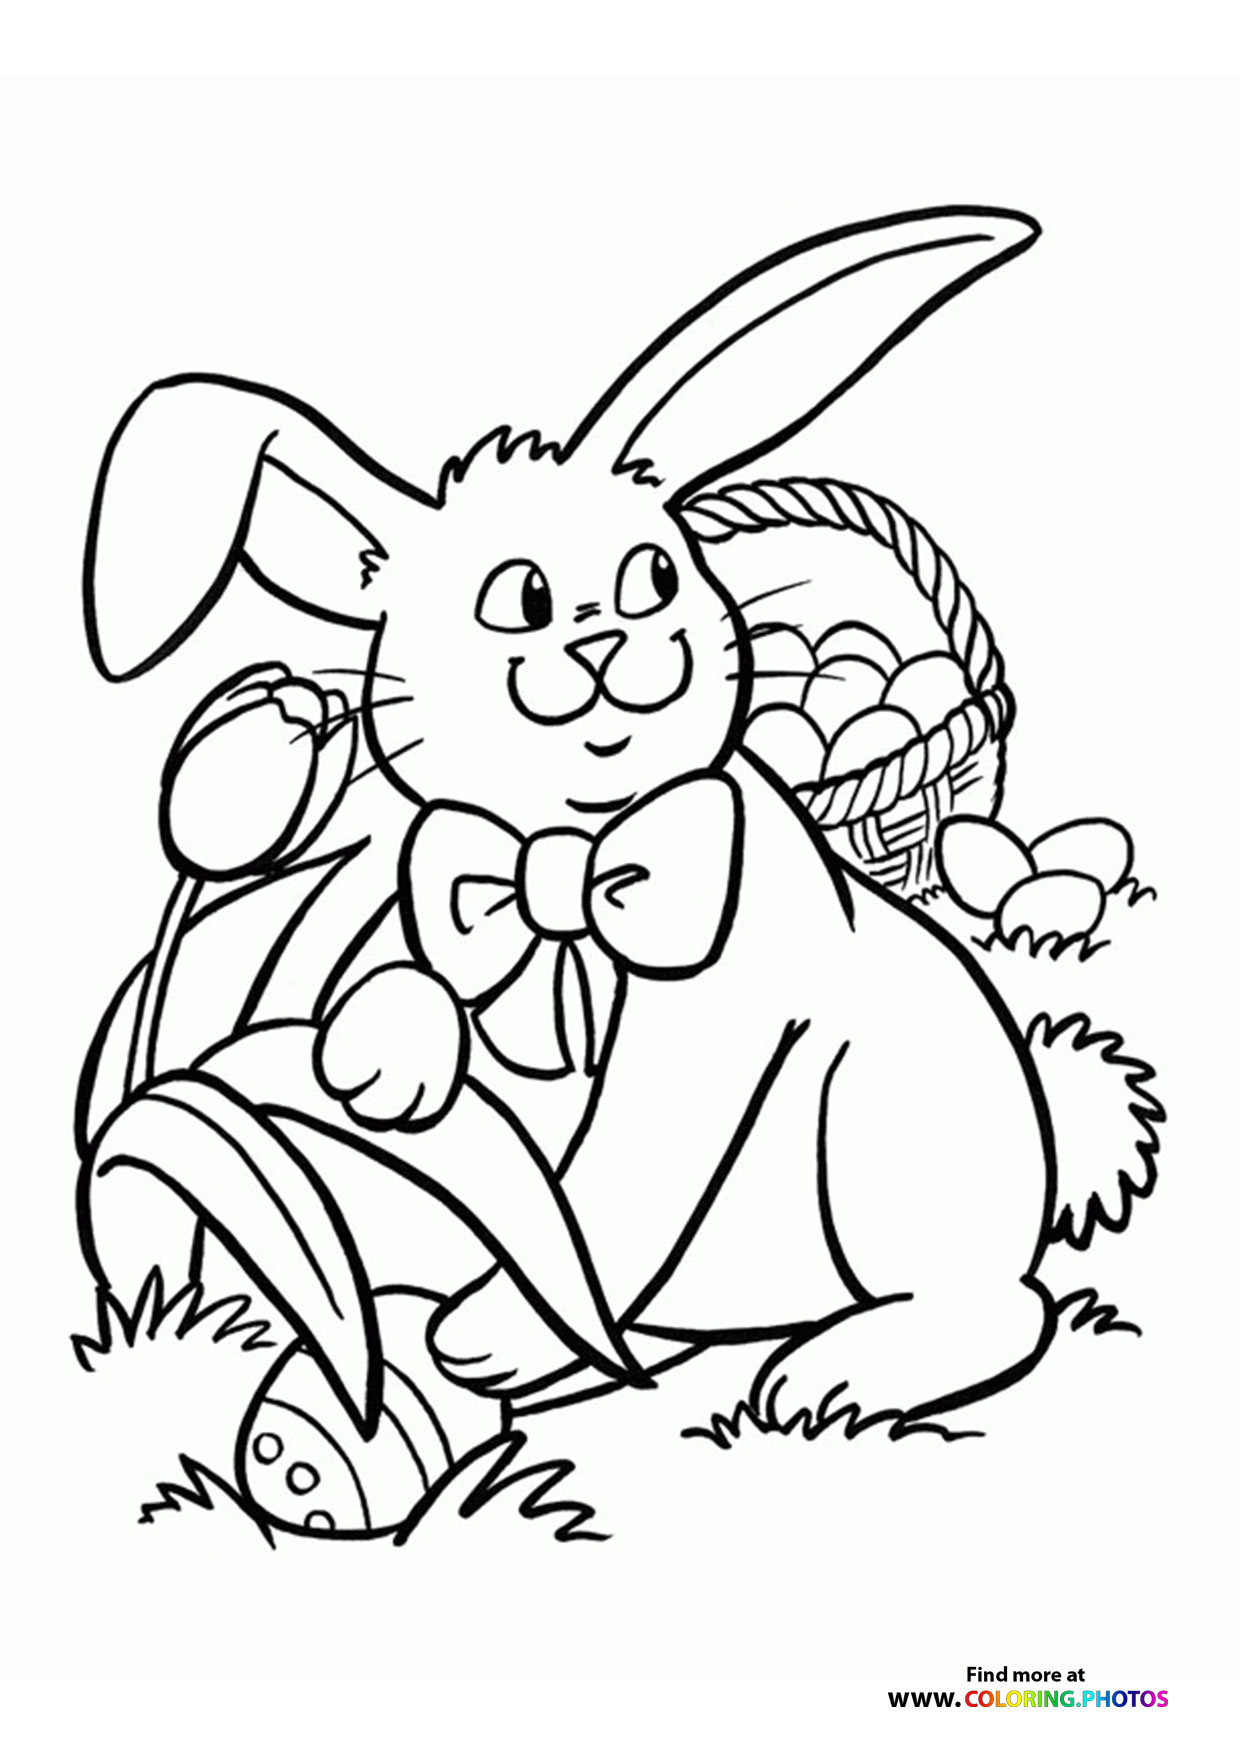 Easter bunny hiding eggs - Coloring Pages for kids